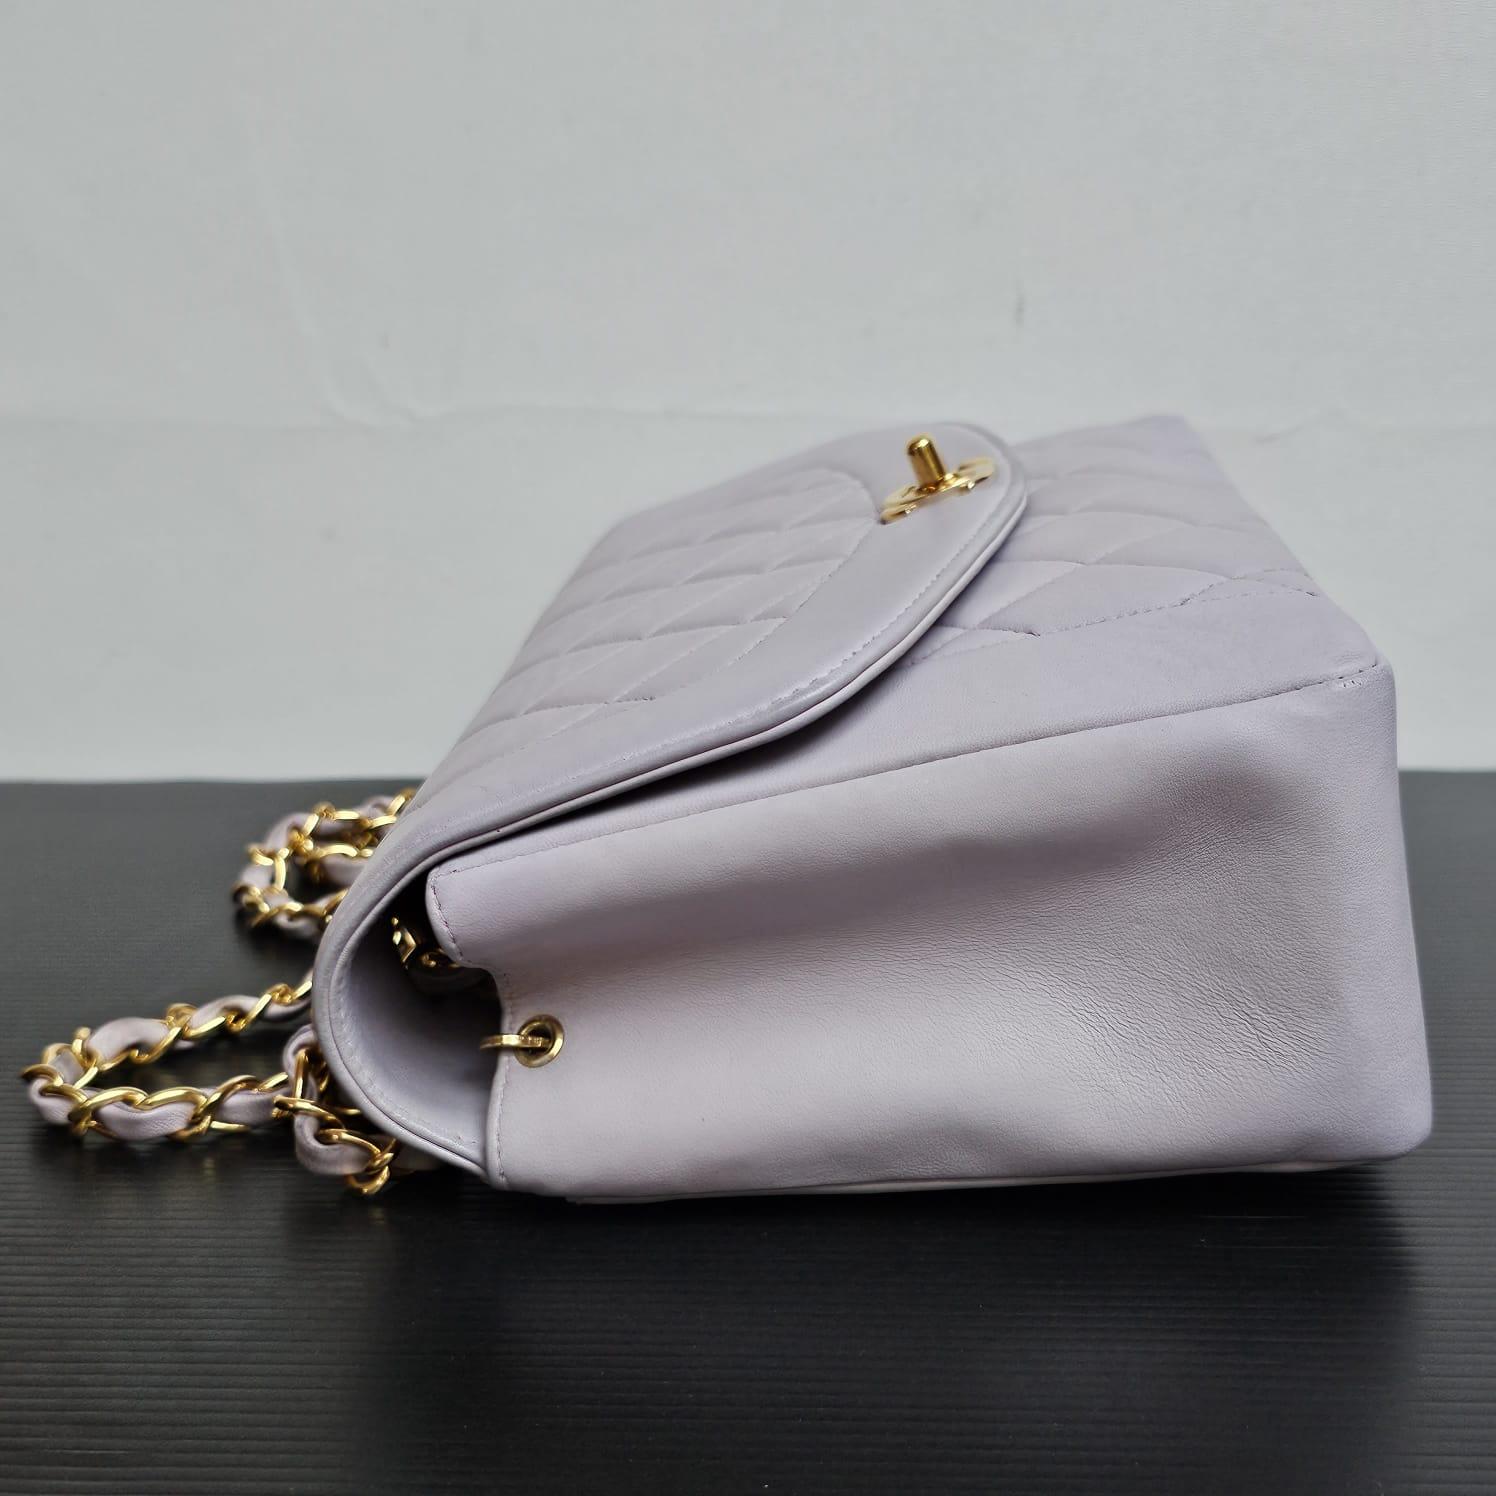 Rare Vintage Chanel Medium Lilac Lambskin Quilted Diana Flap Bag 12